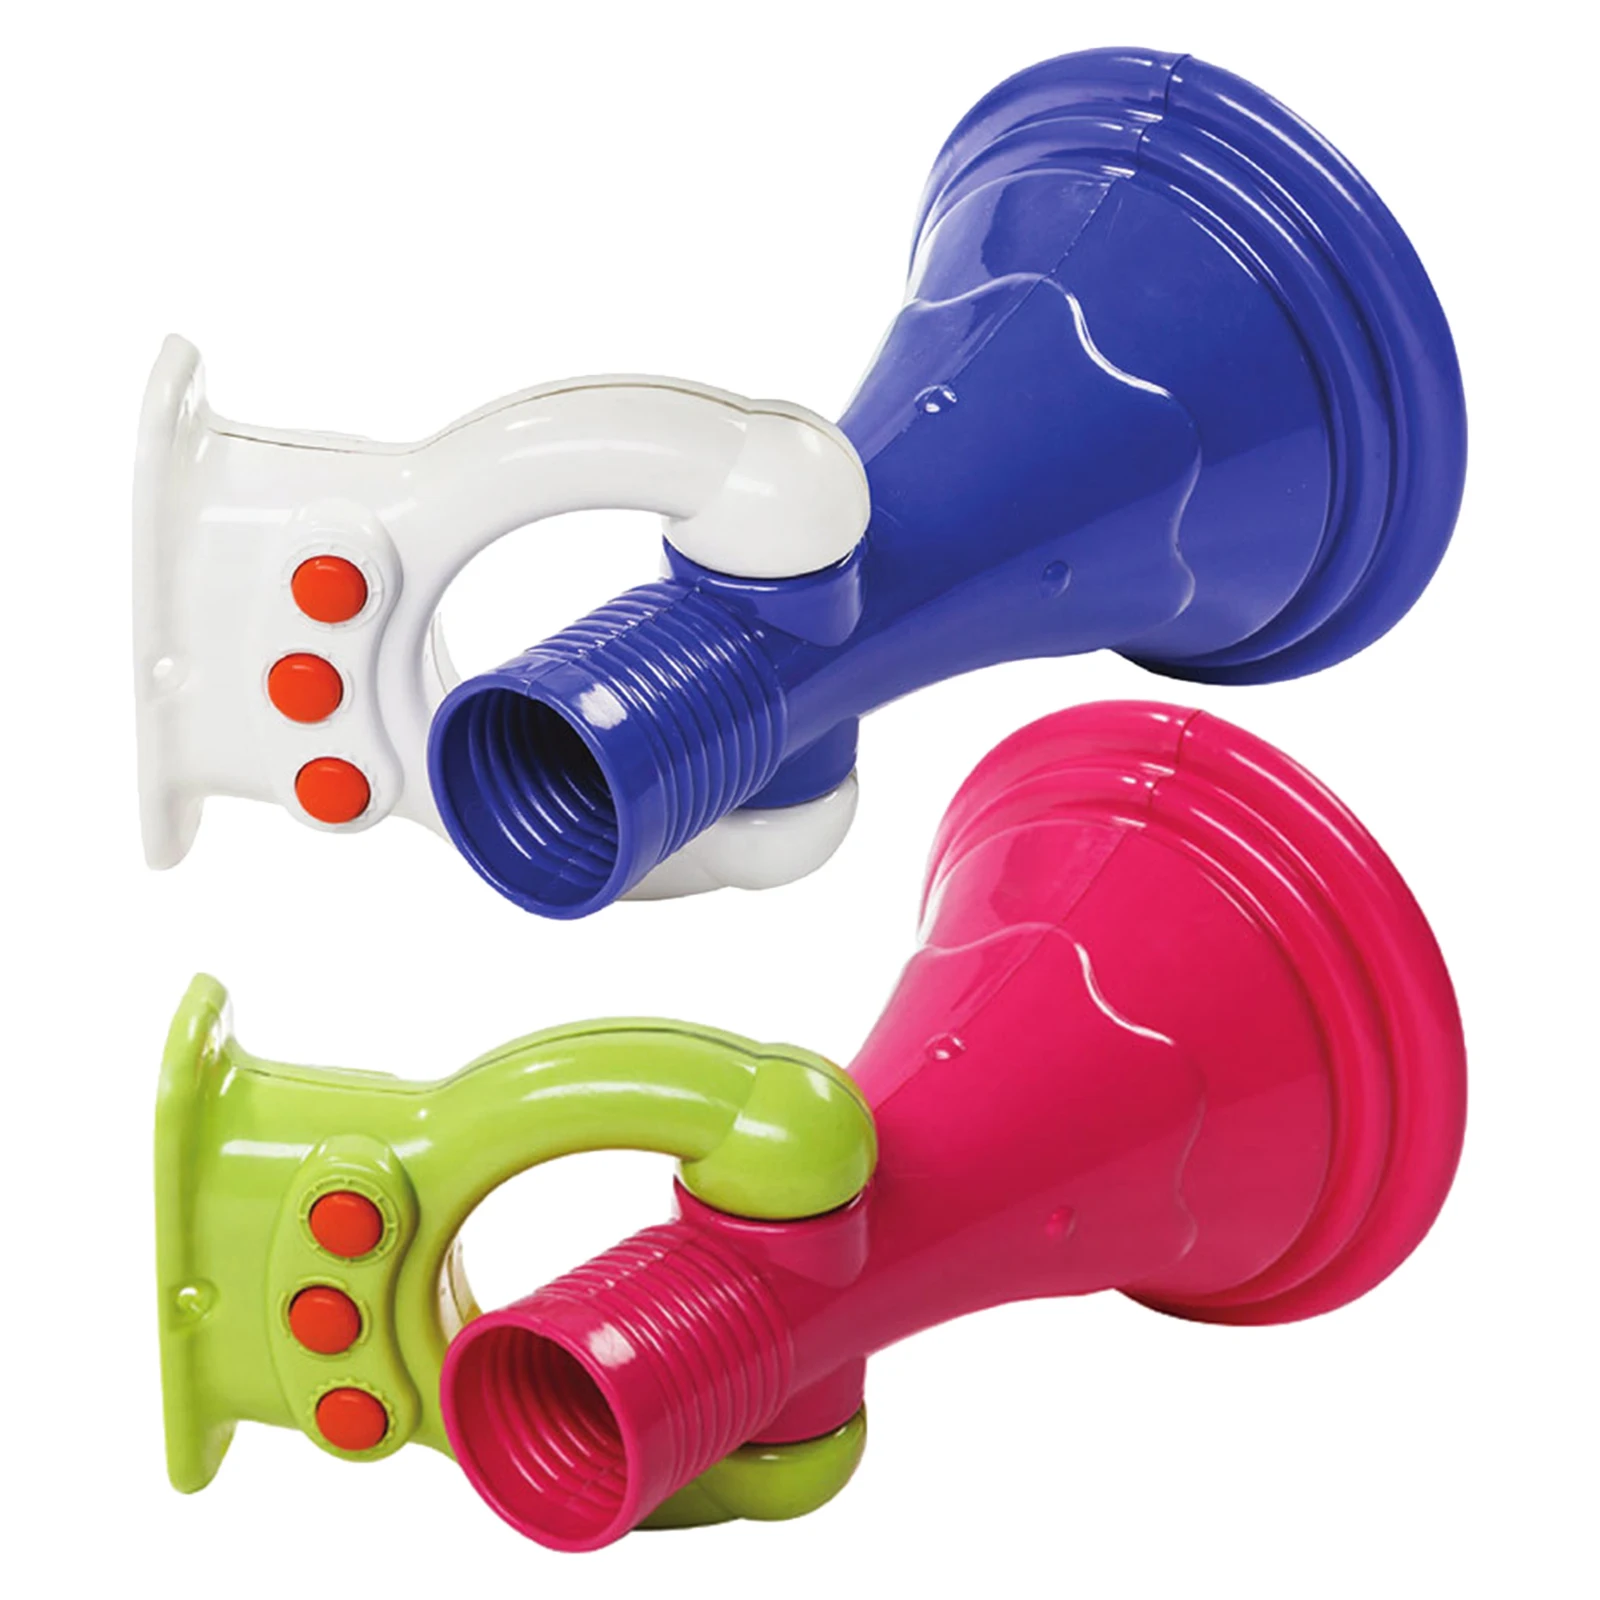 Outdoor Mounting Megaphone Role Play Toy for Playgrounds Slides Fences